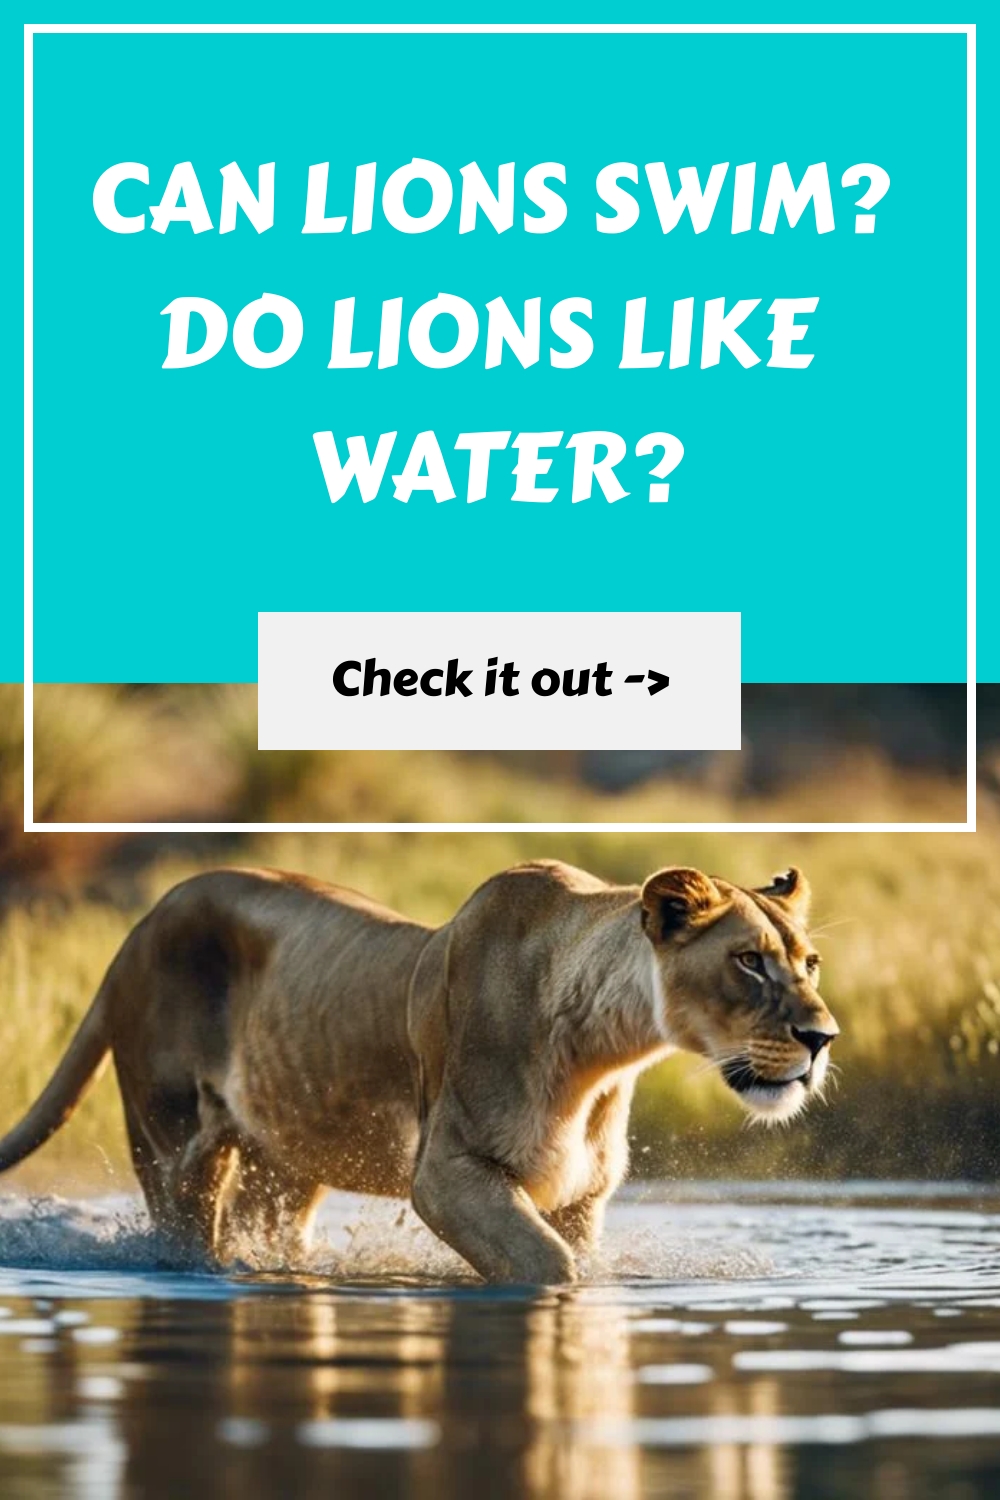 Can Lions Swim? Do Lions Like Water?